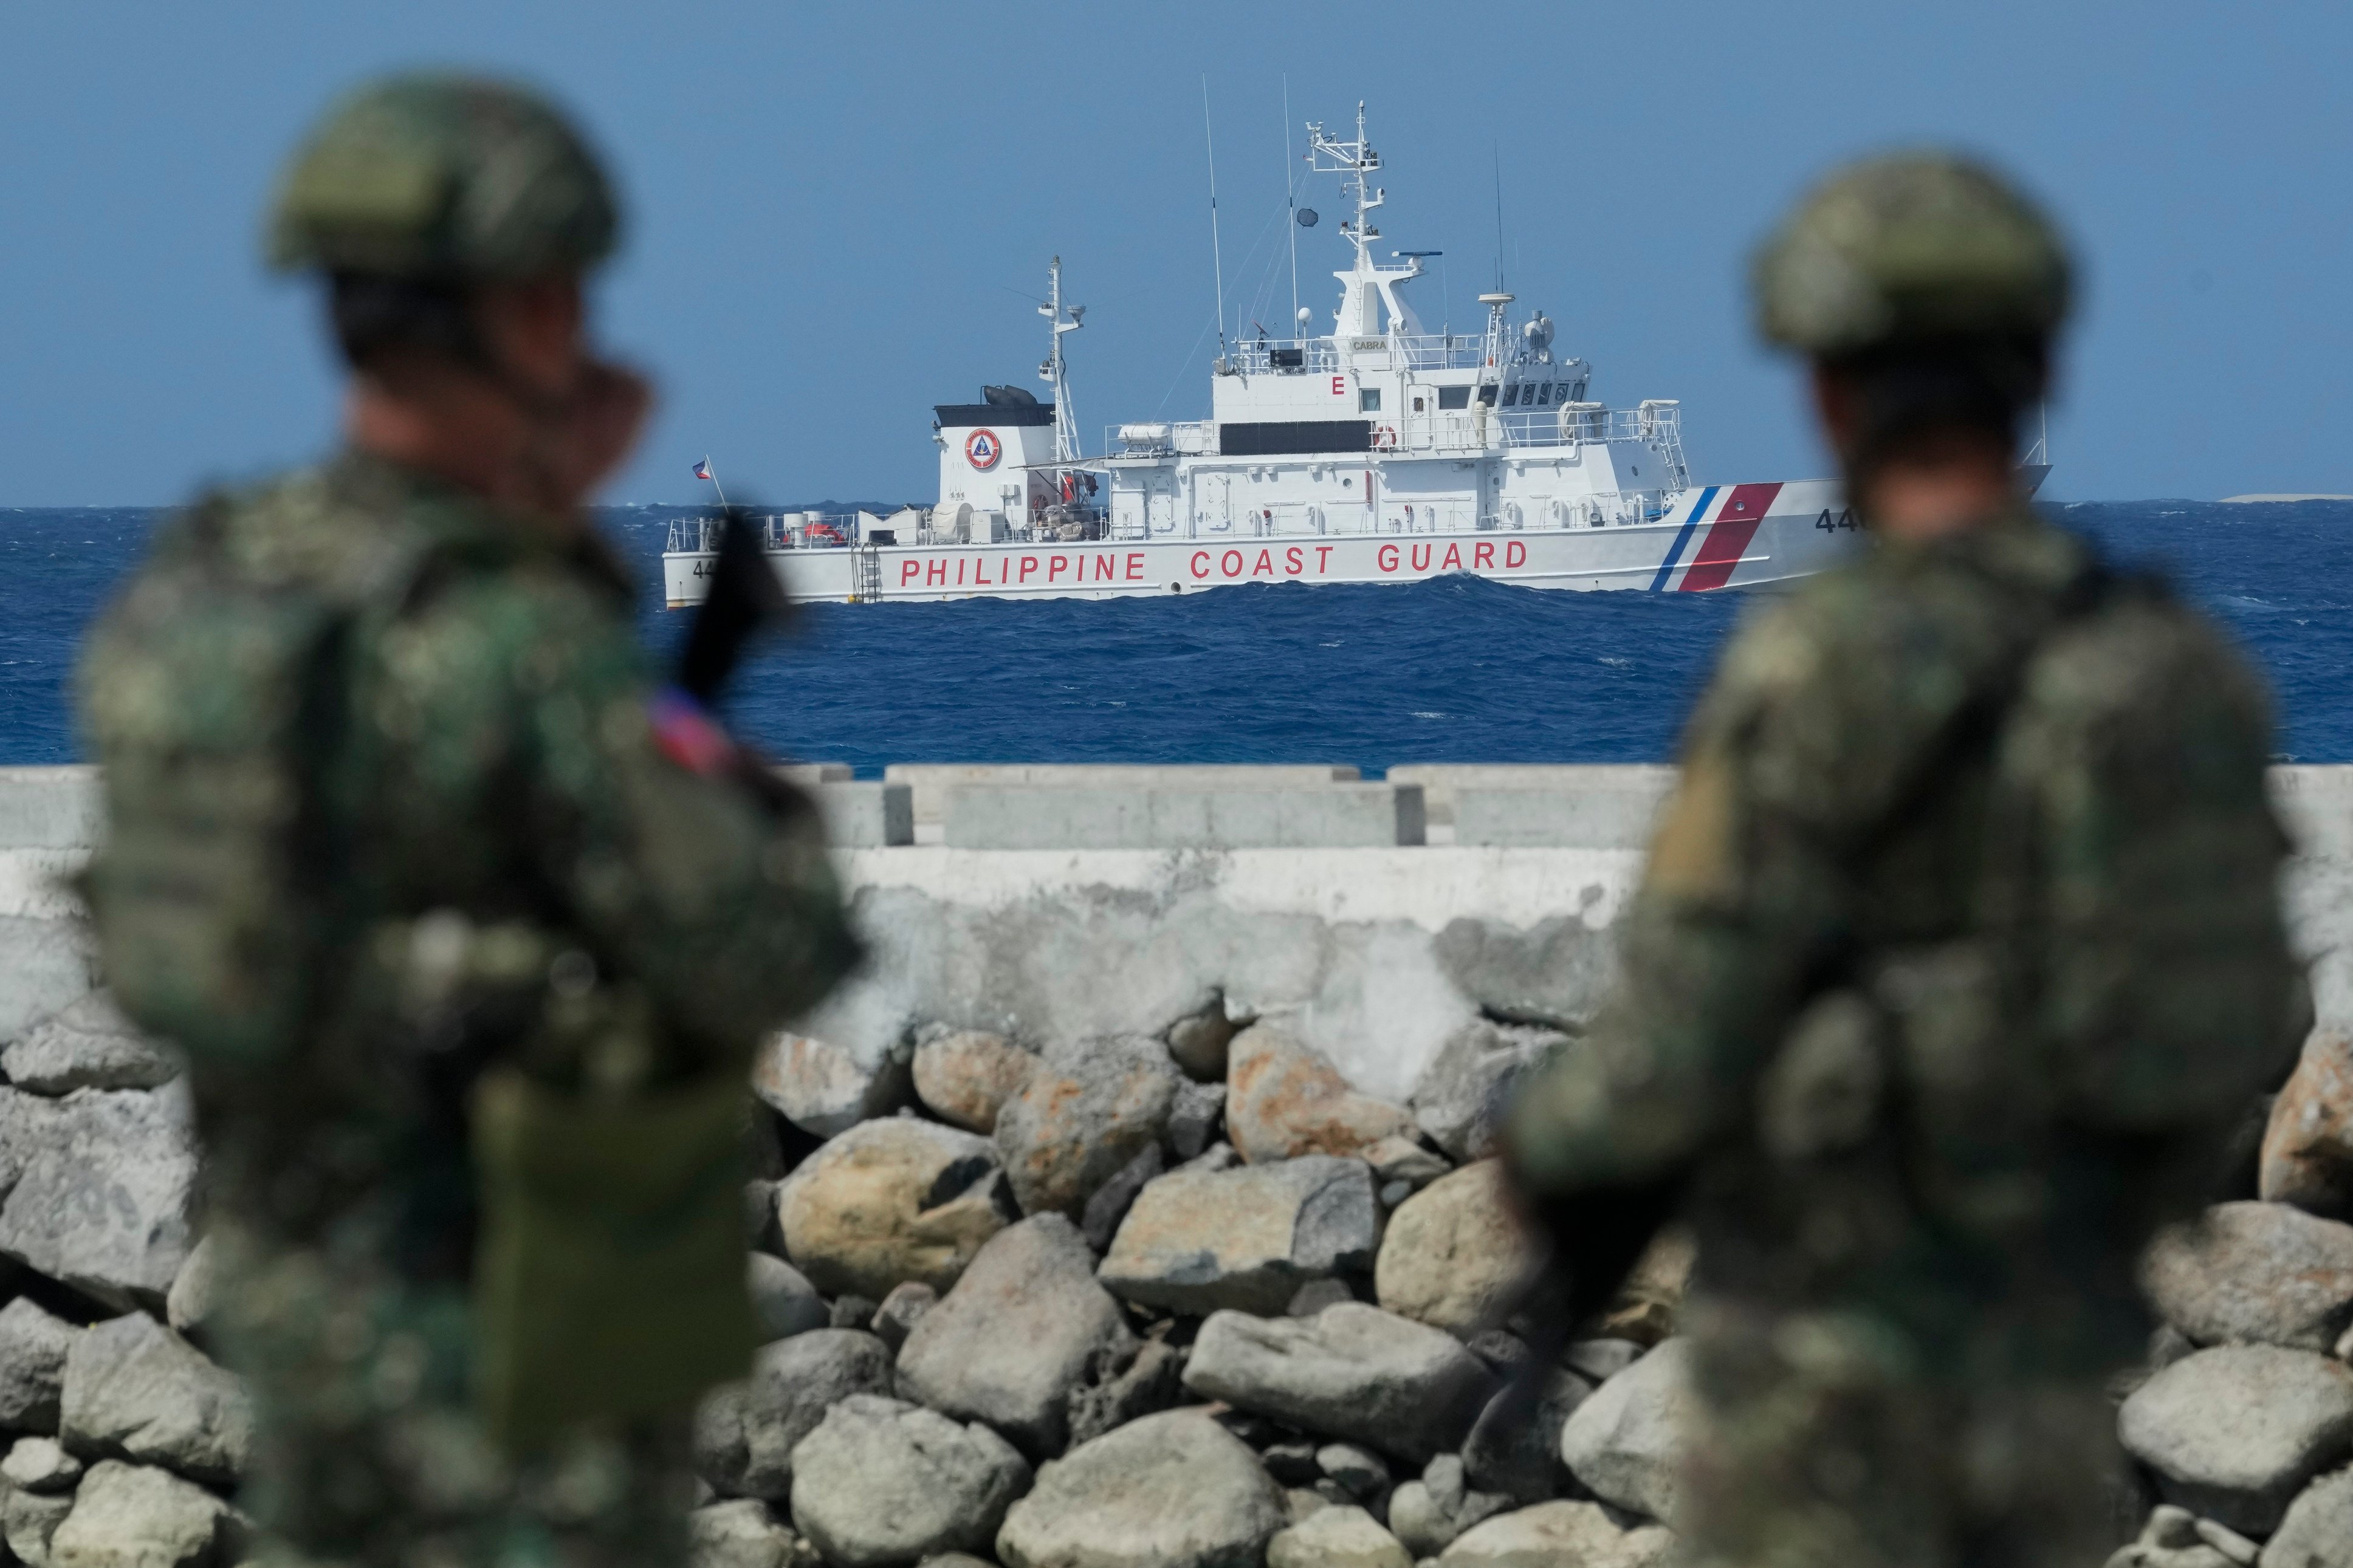 The South China Sea could be a more explosive flashpoint for a US-China crisis than the Taiwan Strait, according to some observers. Photo: AP